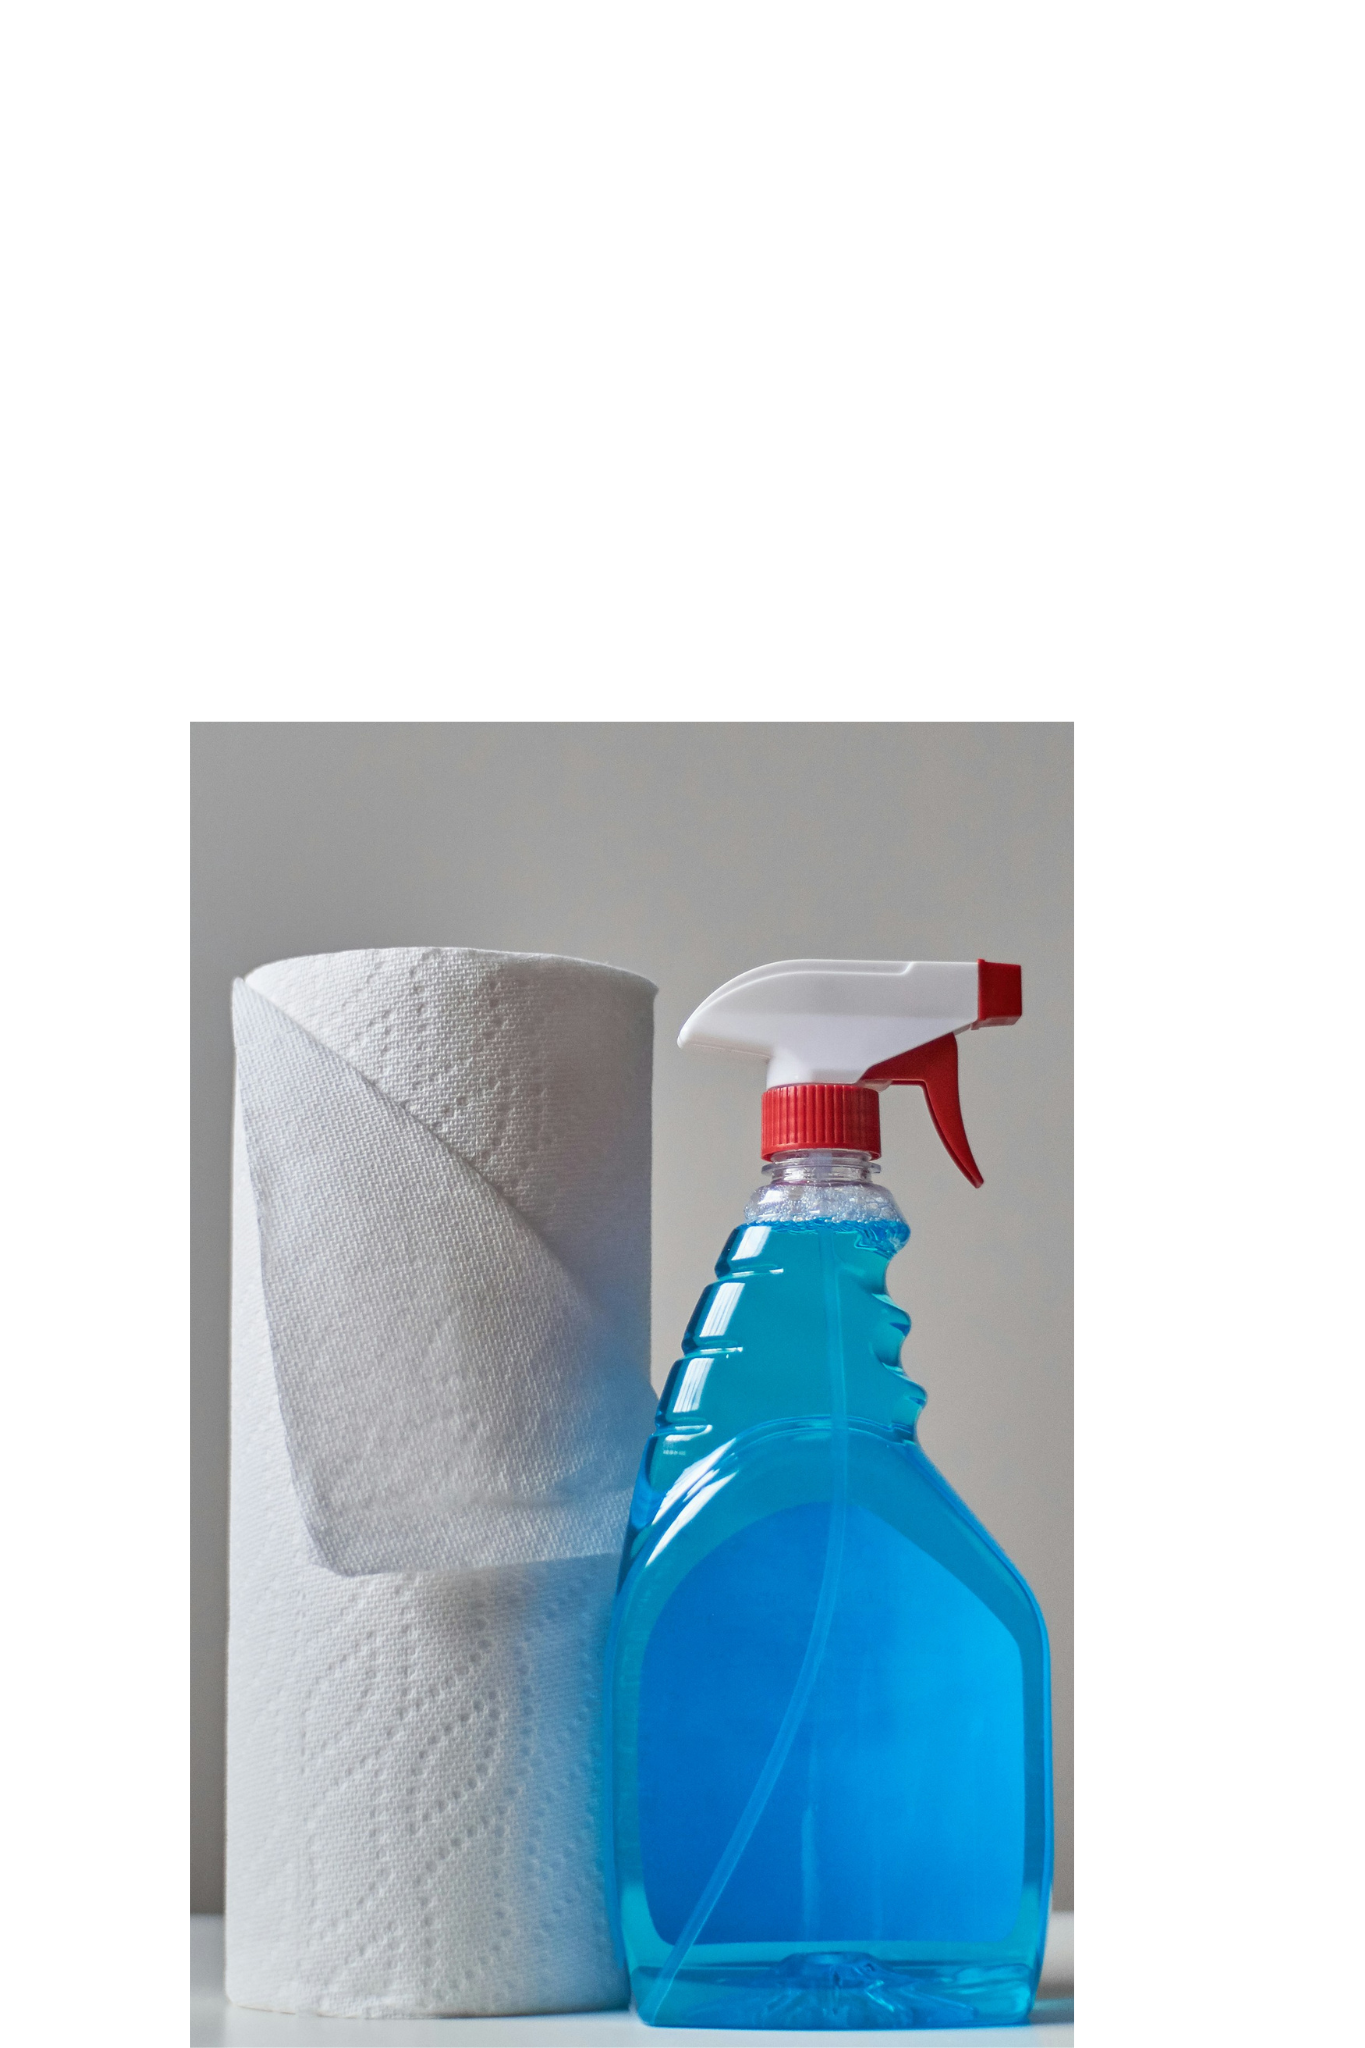 Why There is No Deposit on All Plastic Bottles Such as Detergent and Oil Bottles?